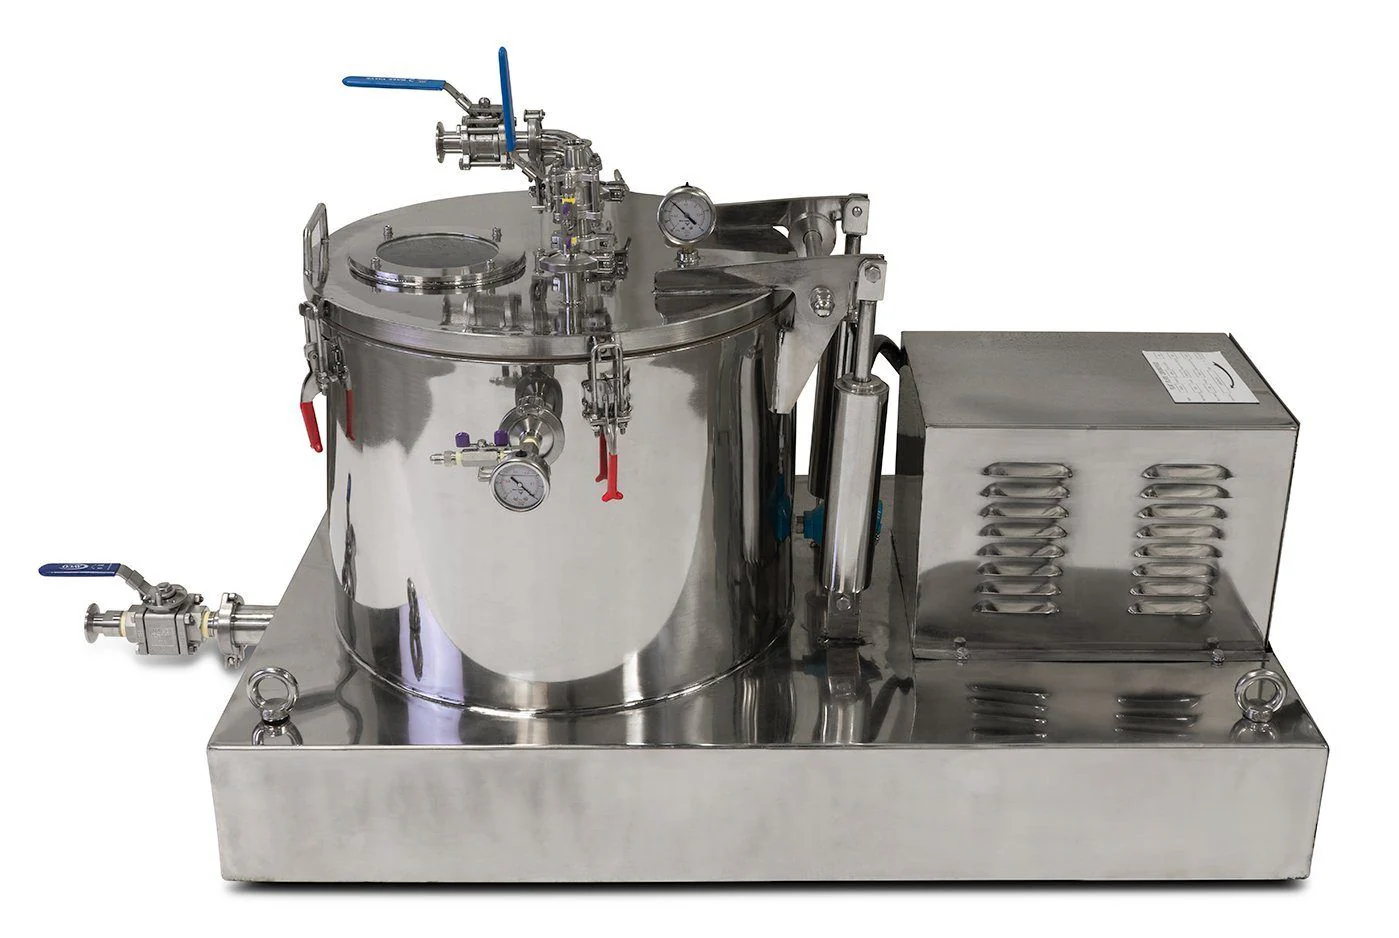 What other components would I need to set this up?45L Jacketed Stainless Steel Centrifuge - 15LB Max Capacity